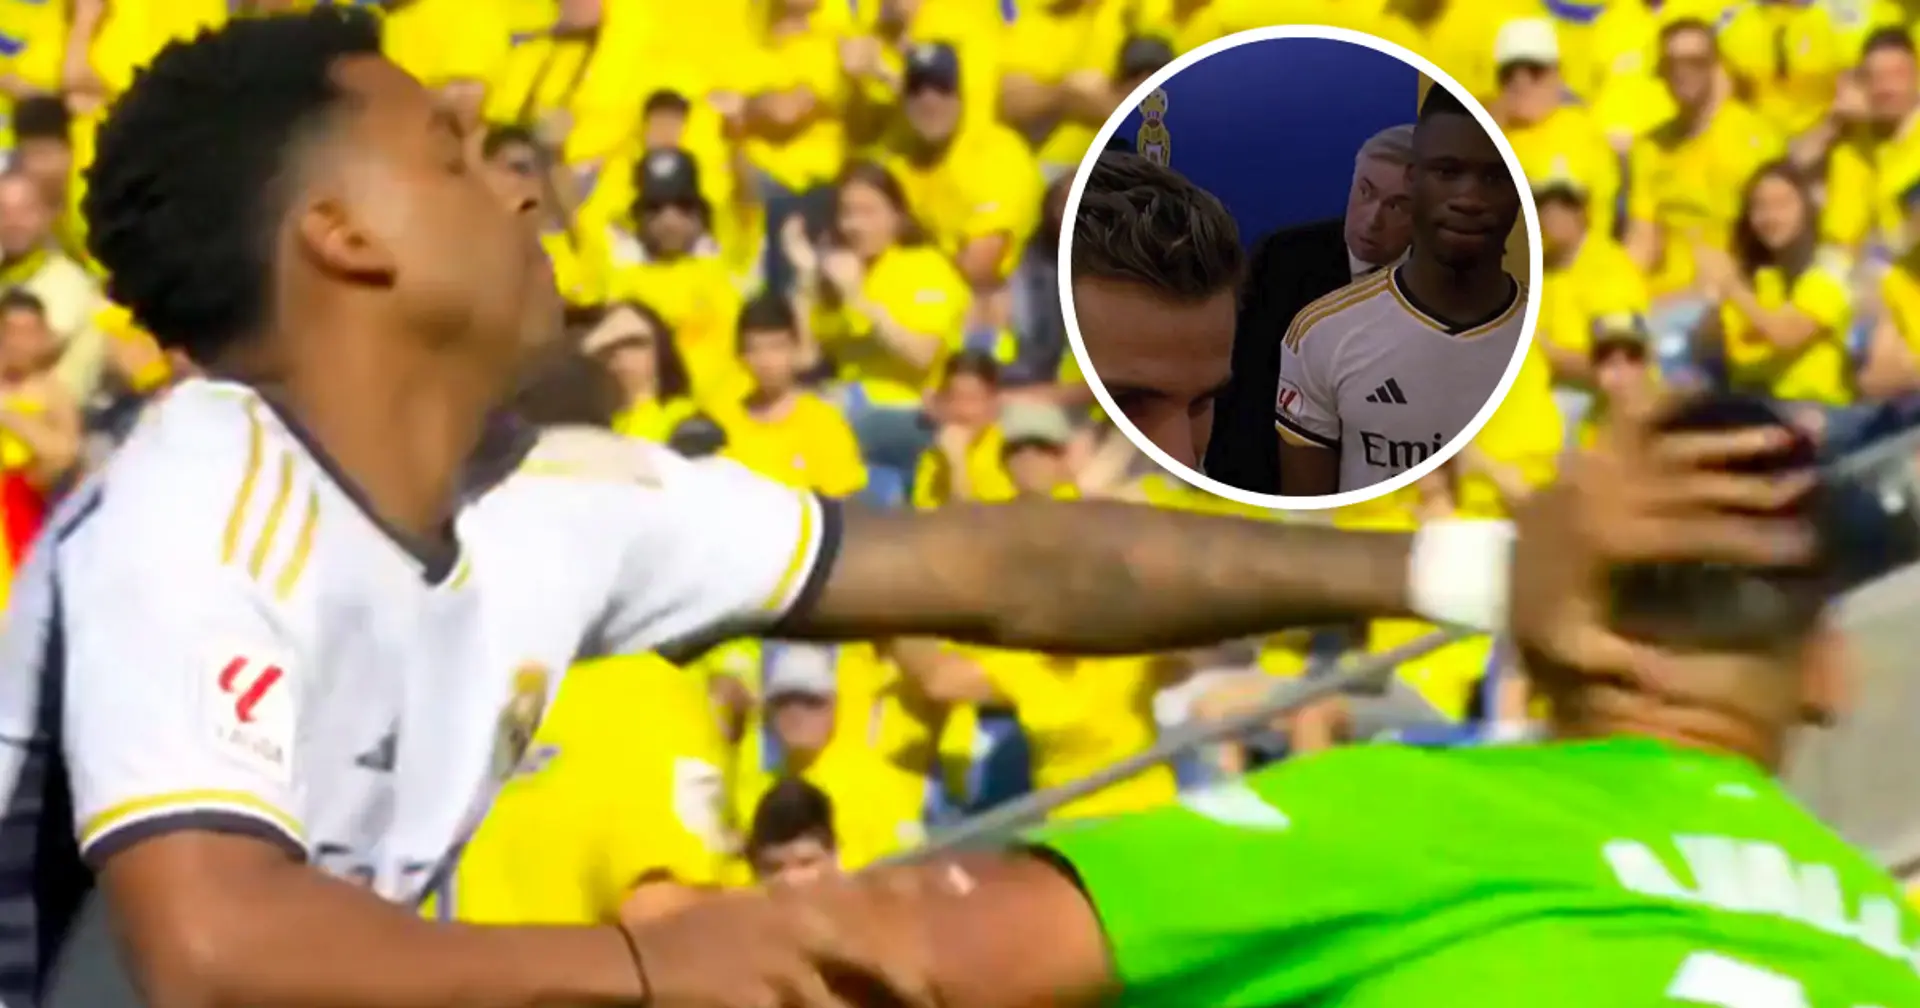 Leaked video shows ref telling Real Madrid captain their player should've been sent off – that same ref only showed yellow